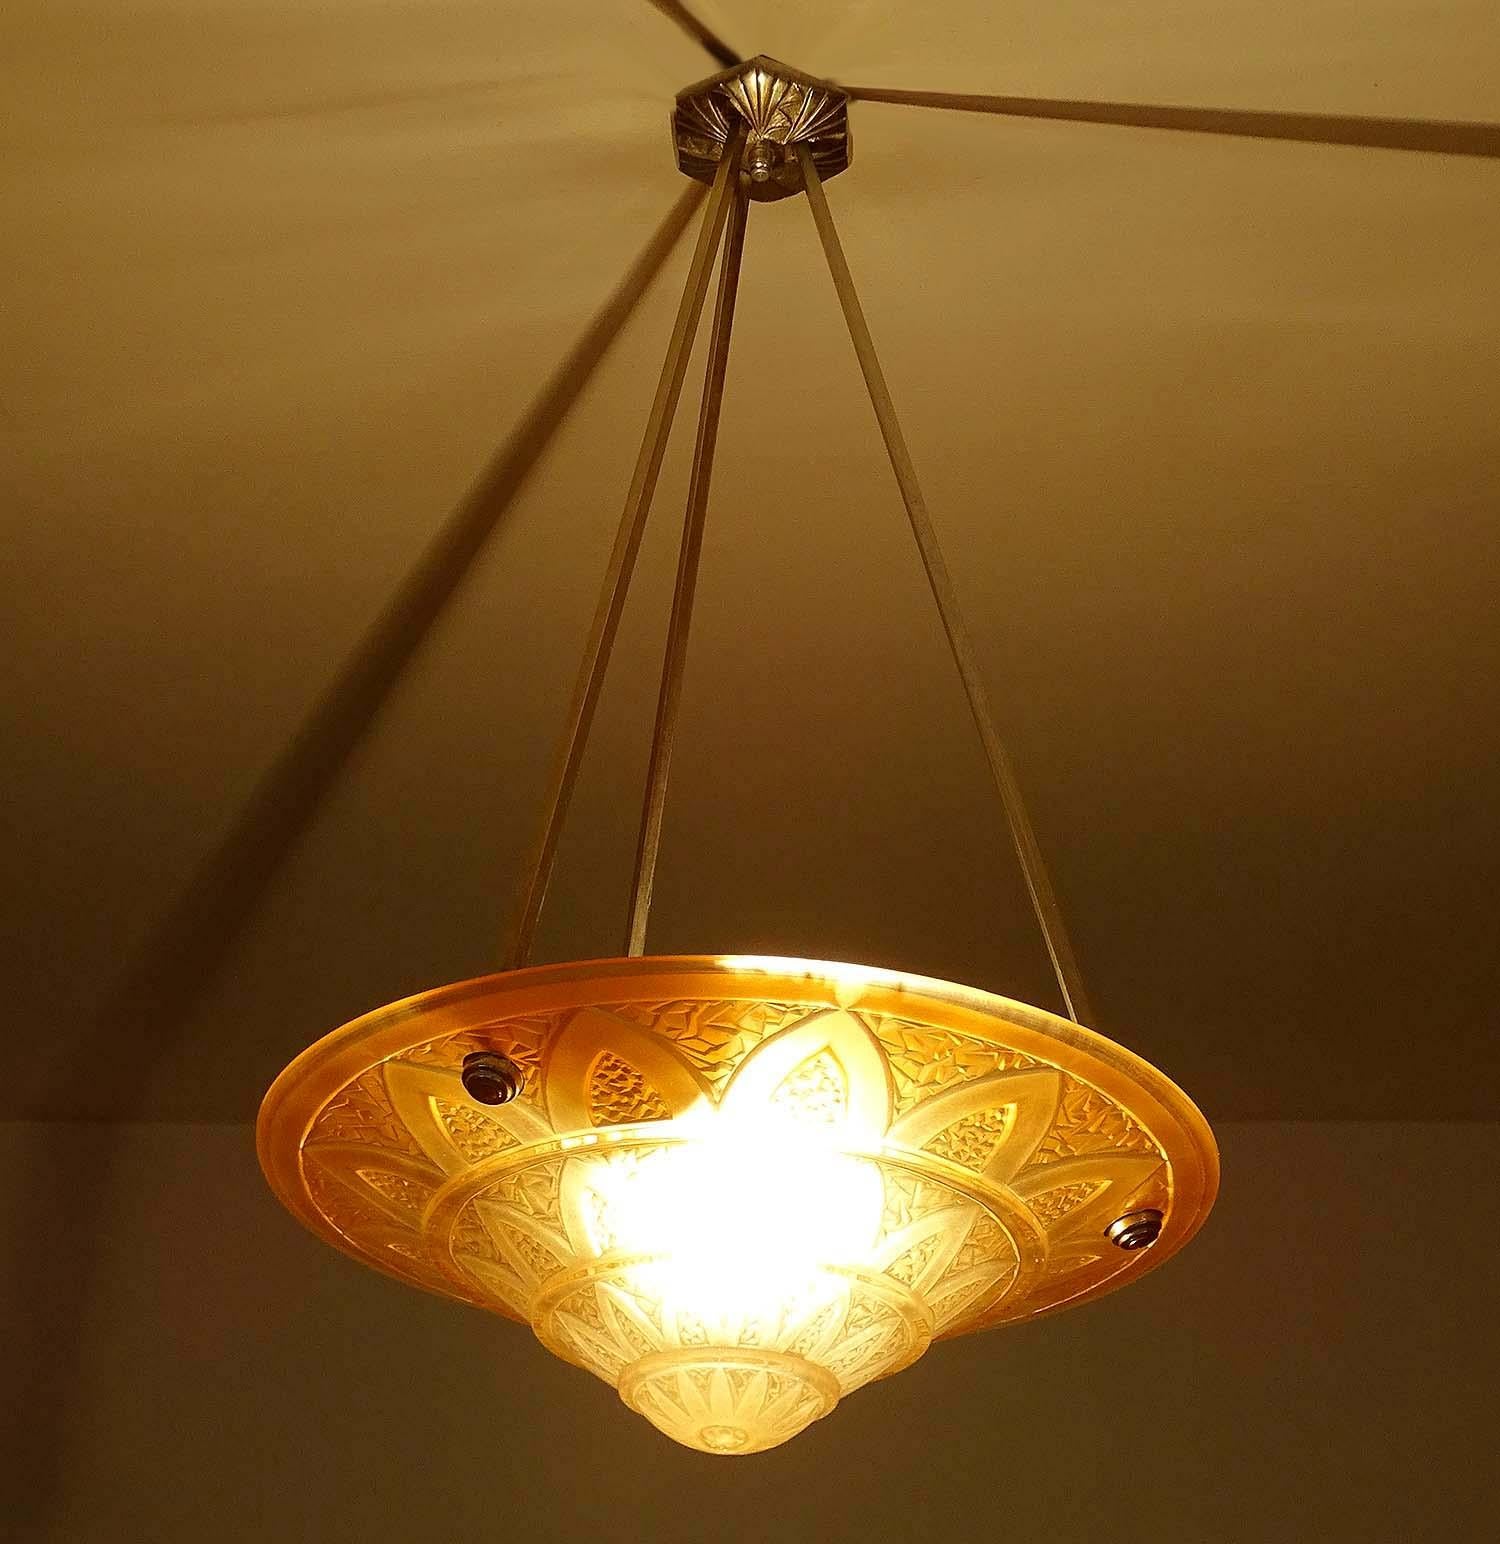 French Art Deco chandelier with molded glass shade showing geometric patterns inspired by ancient Egypt papyrus columns found in the Karnak temple, thick relief . Suspended on nickel plated bronze and brass fixture.
Dimensions:
H 25.6 in. x Dm 13.78